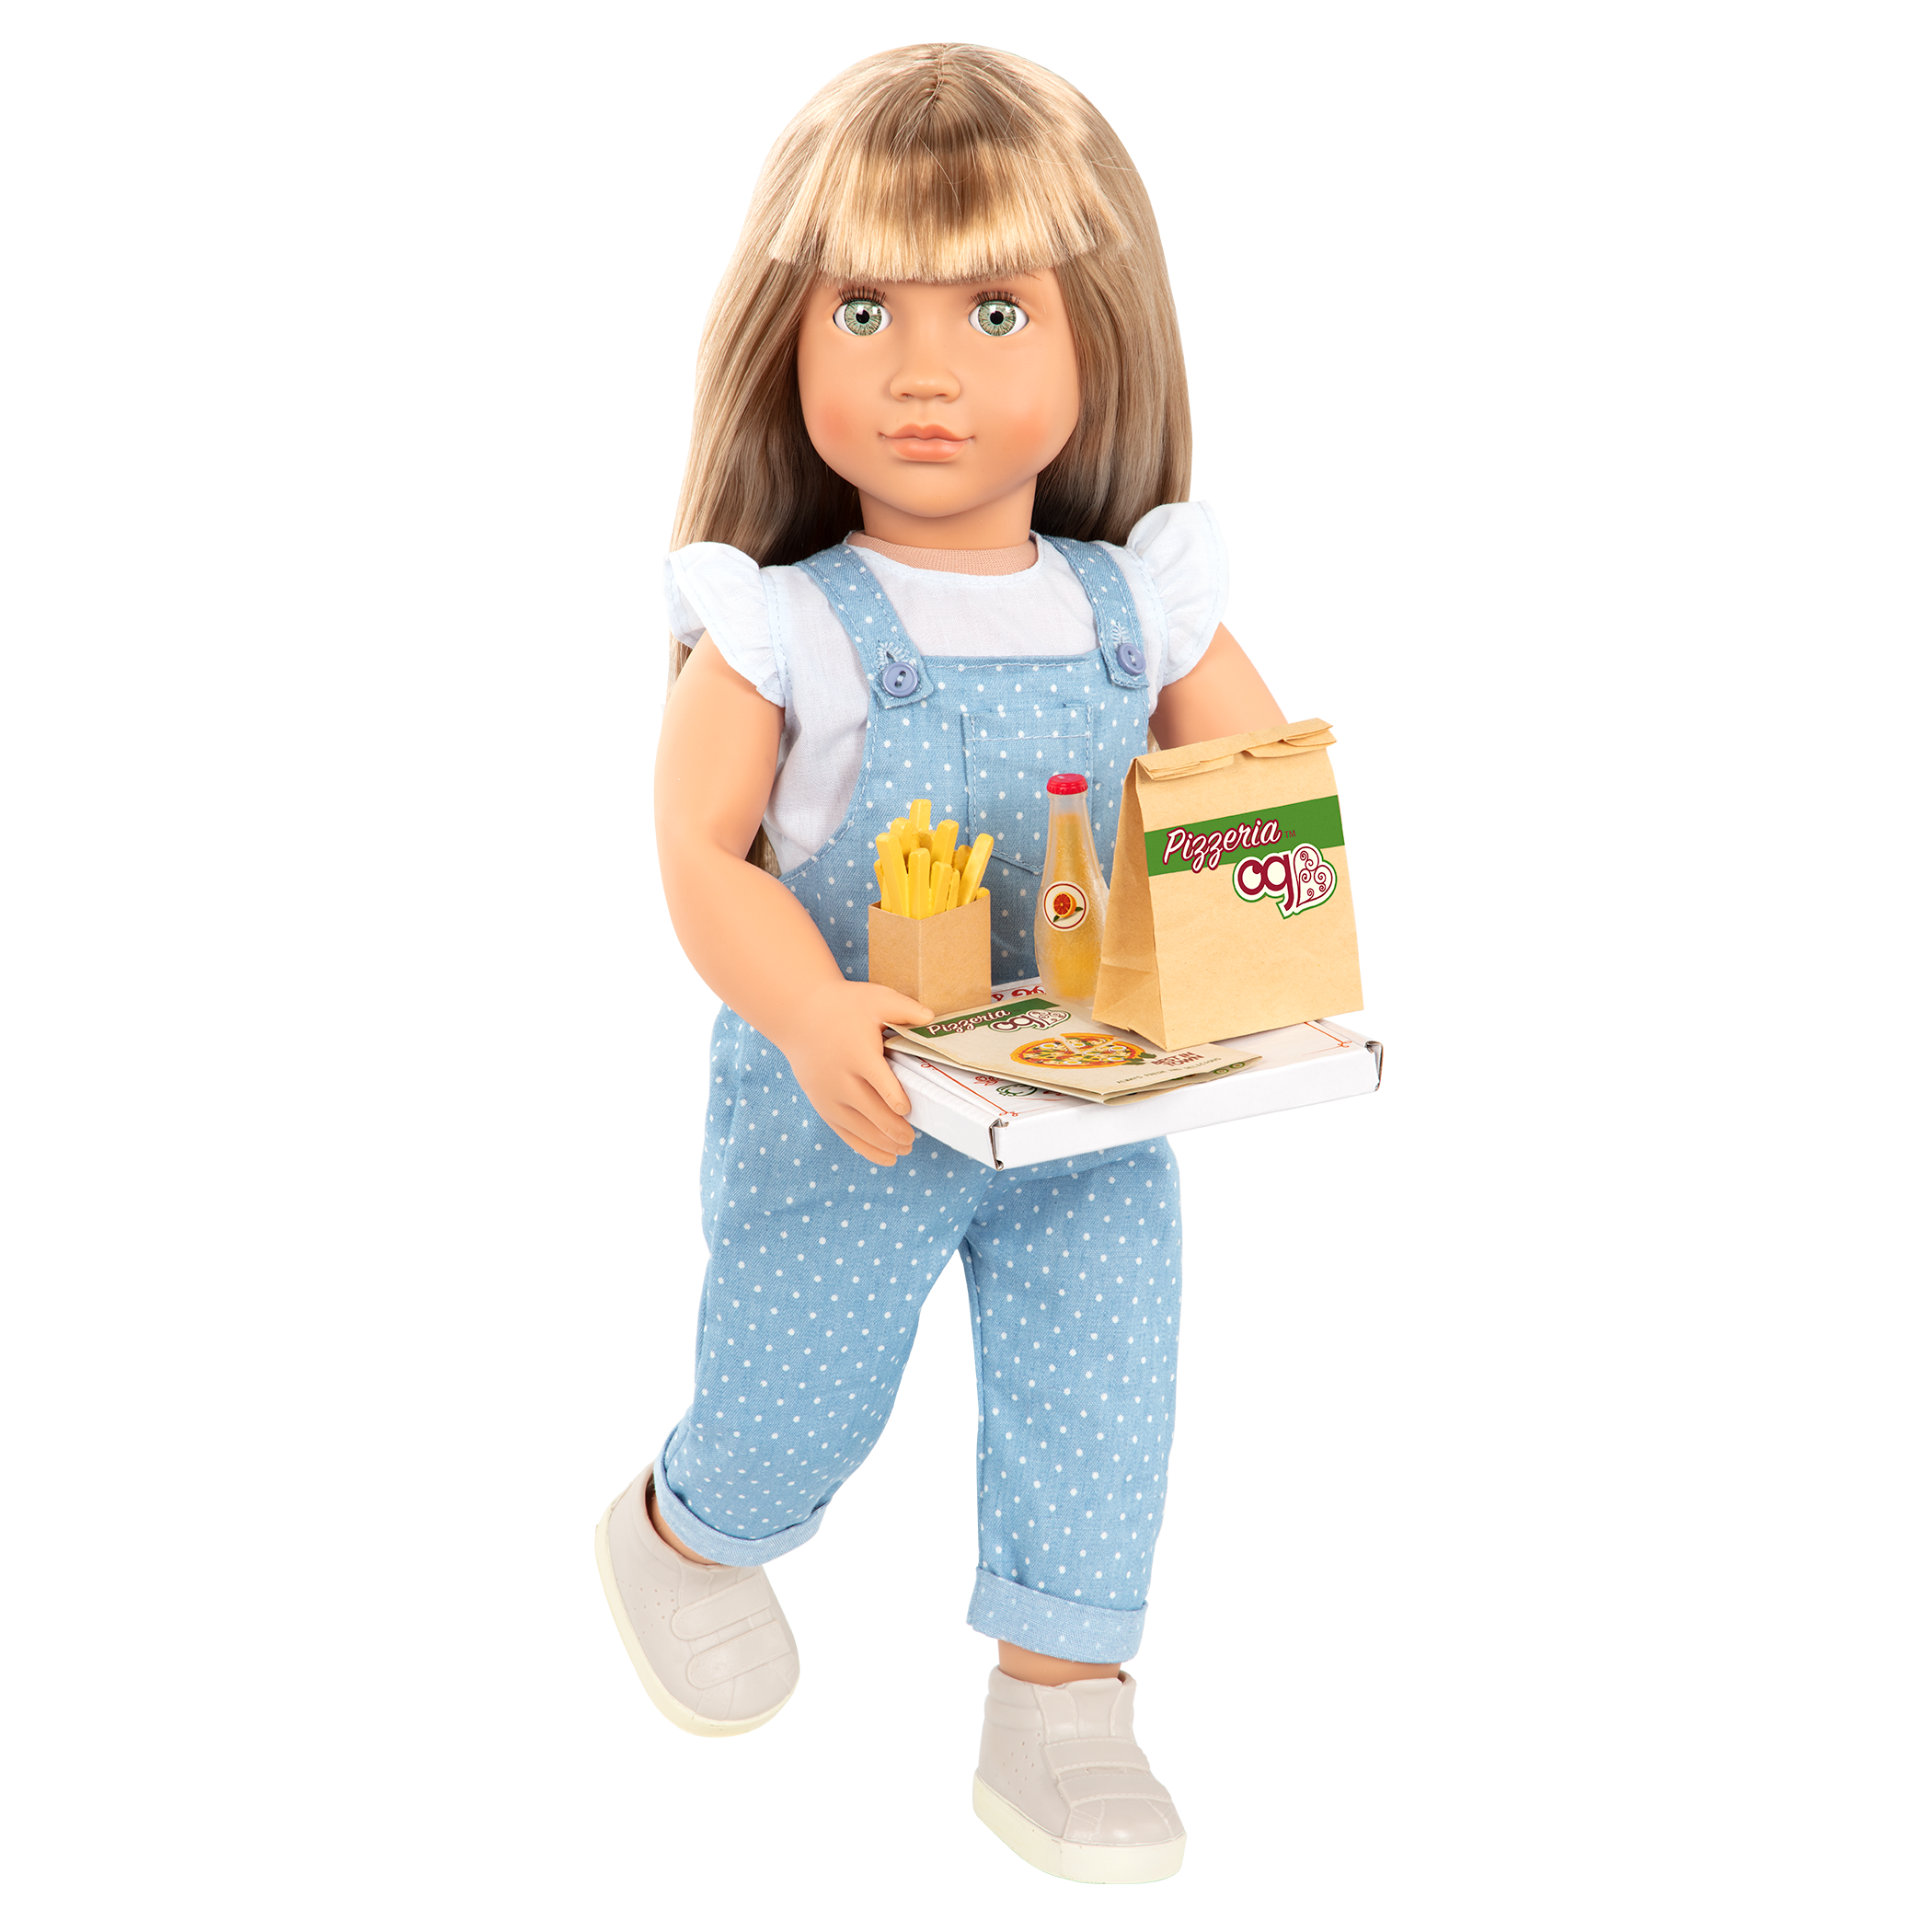 18-inch dolls with pizza delivery playset